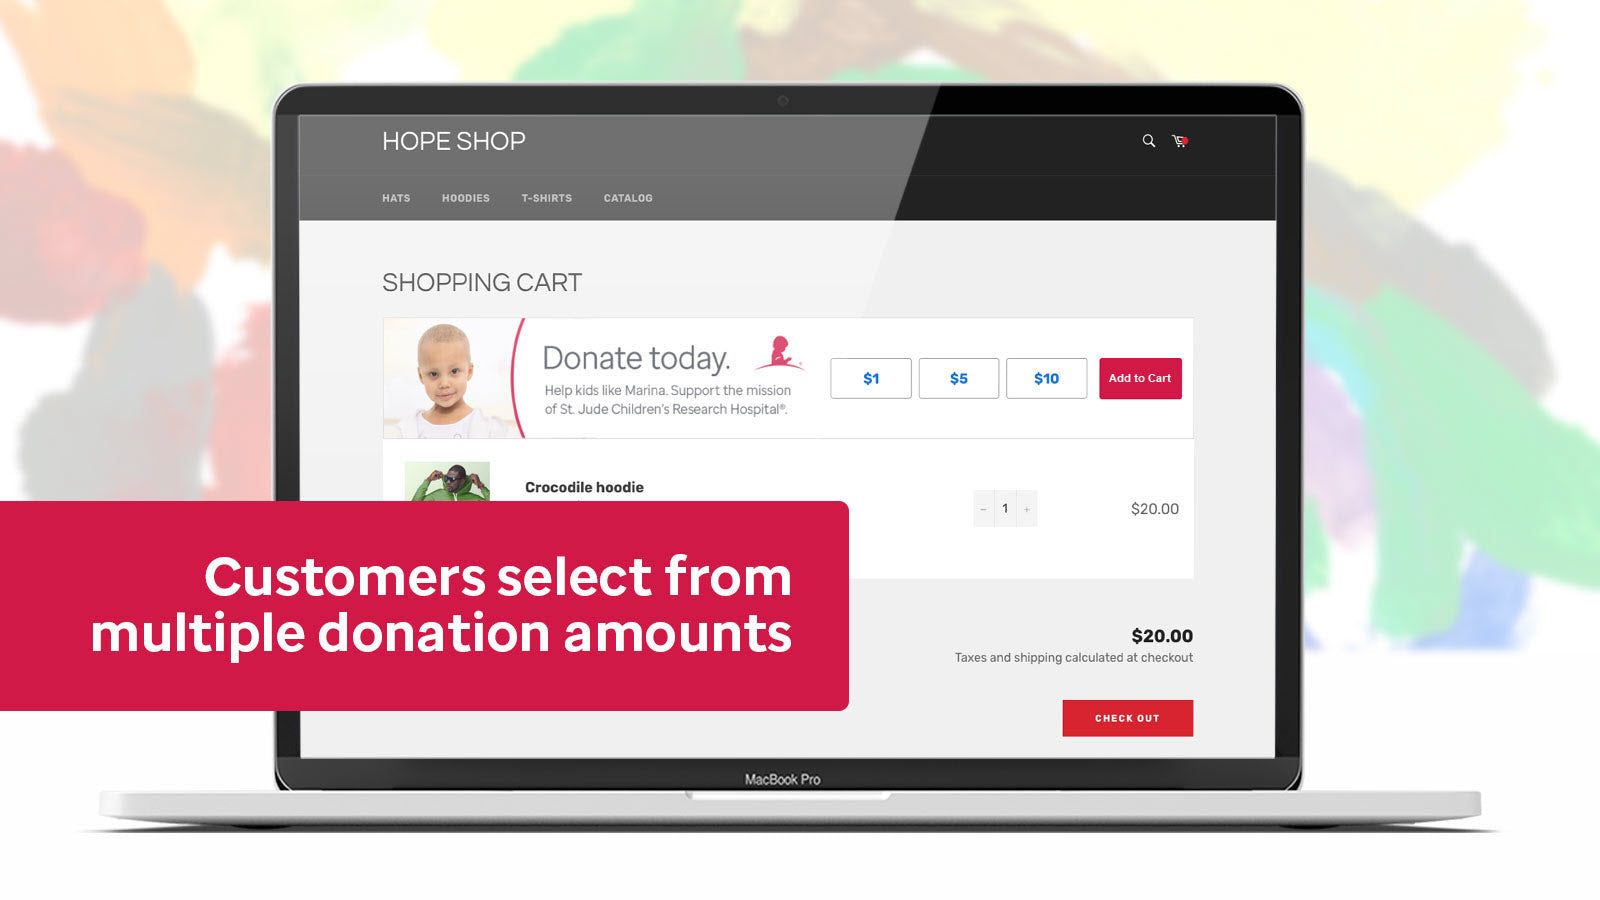 Customers select from multiple donation amounts